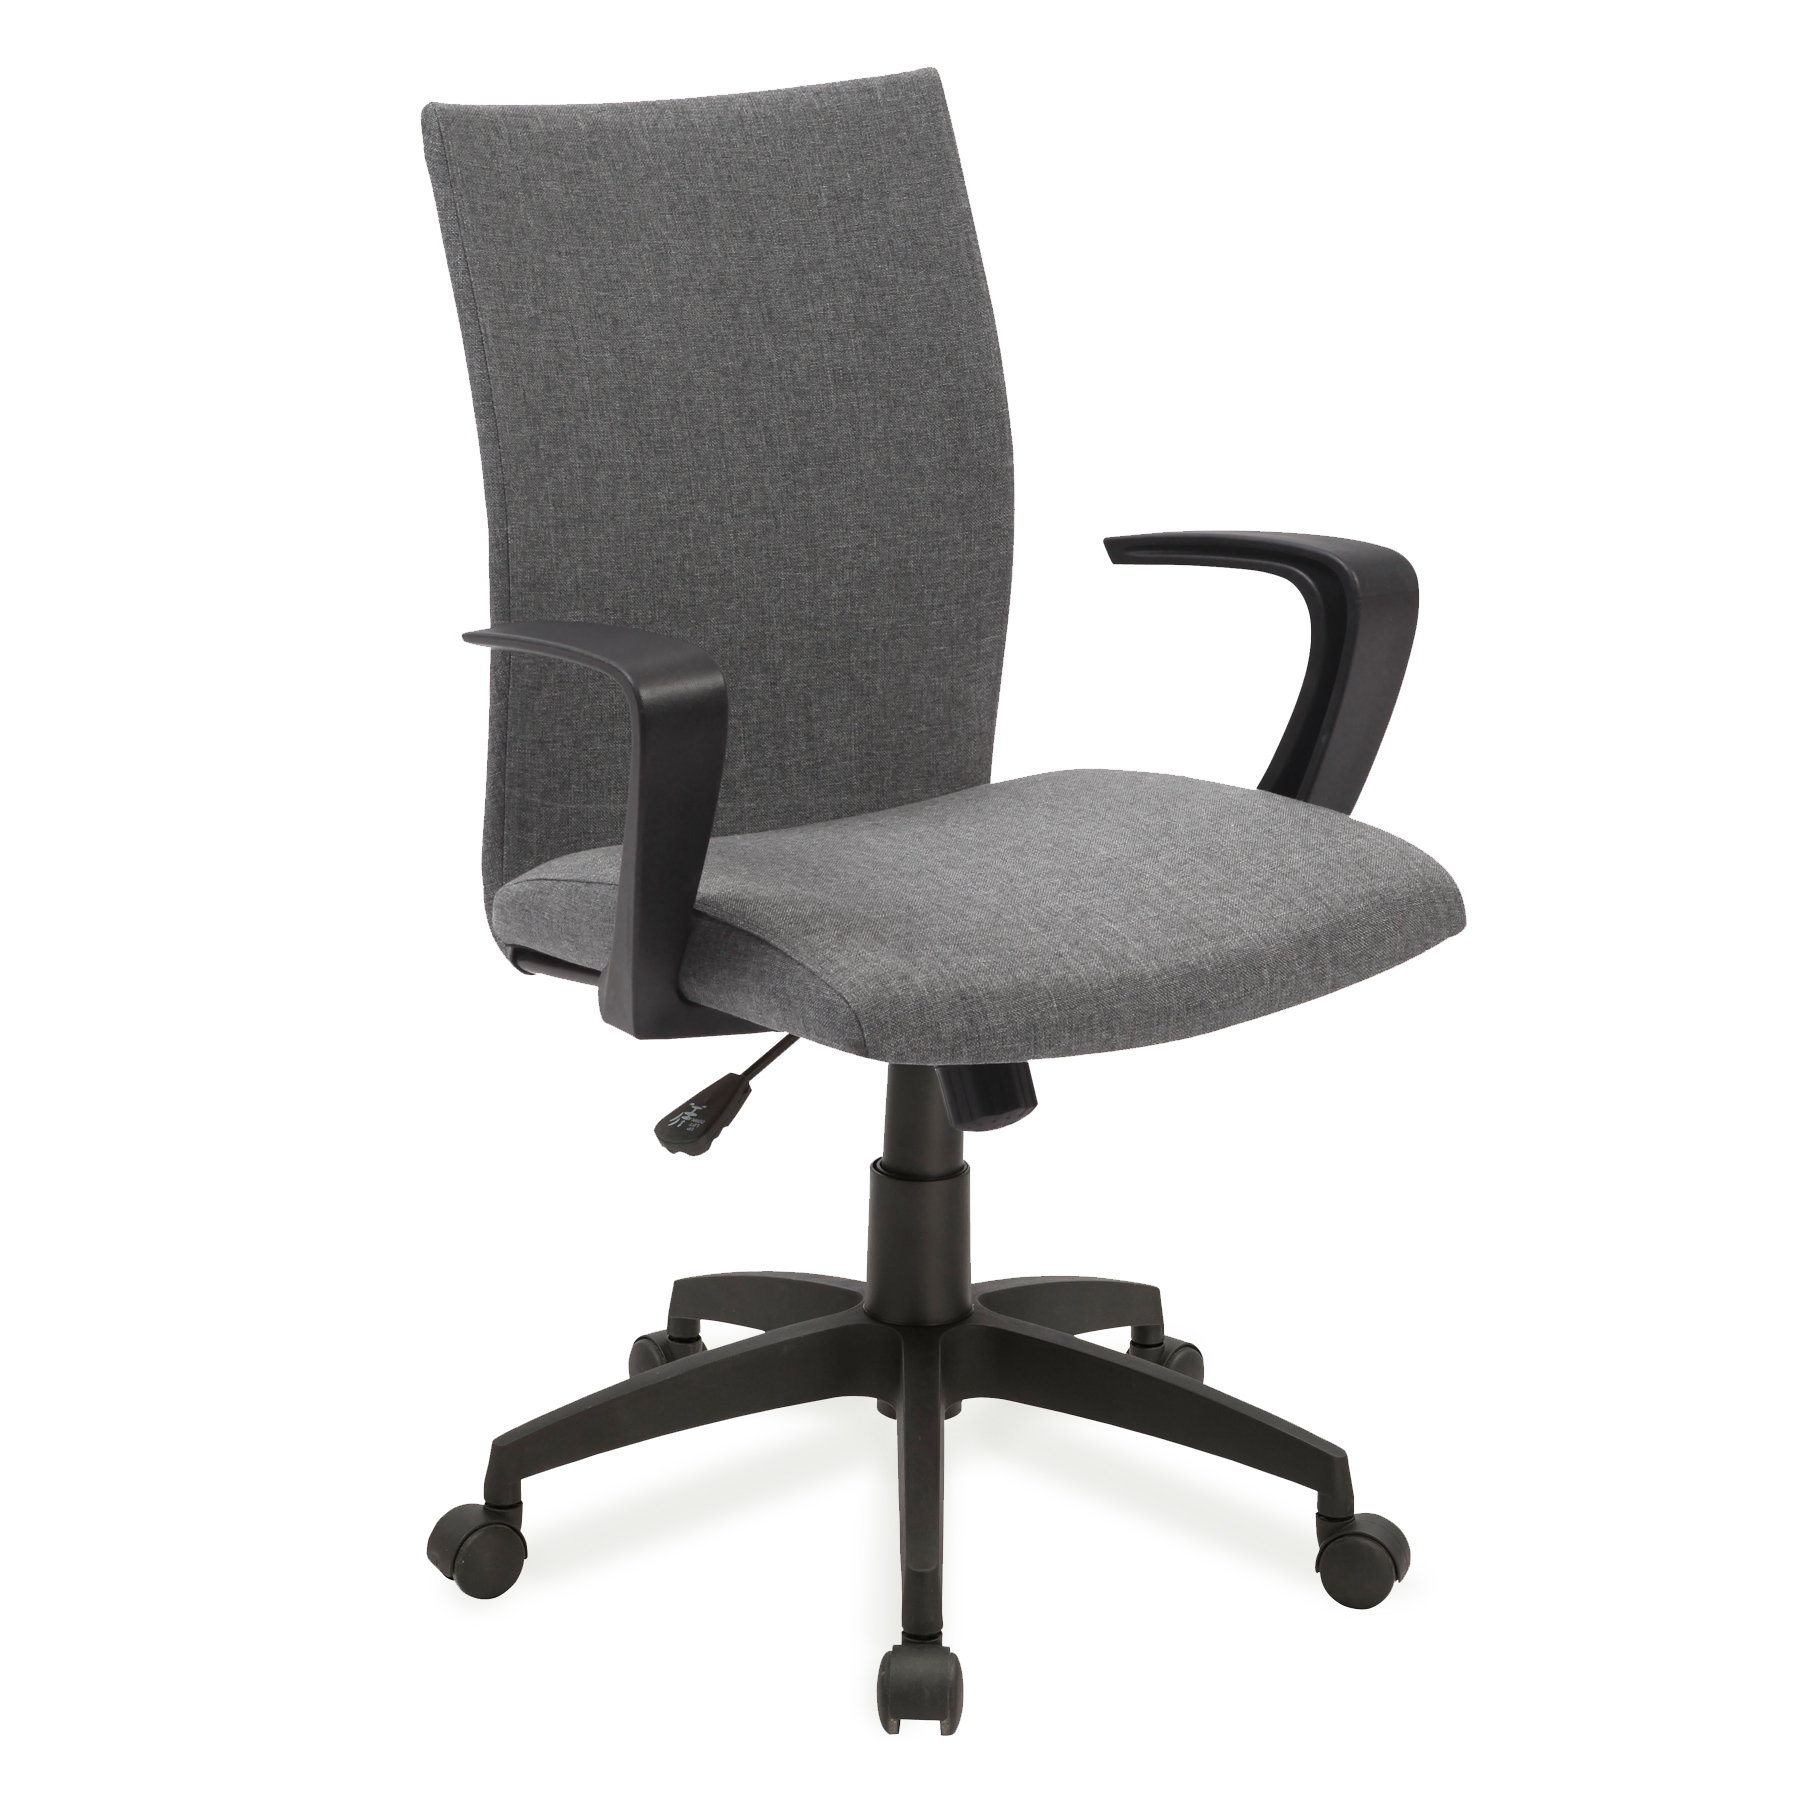 Leick Grey Linen Apostrophe Office Chair with Black Caster